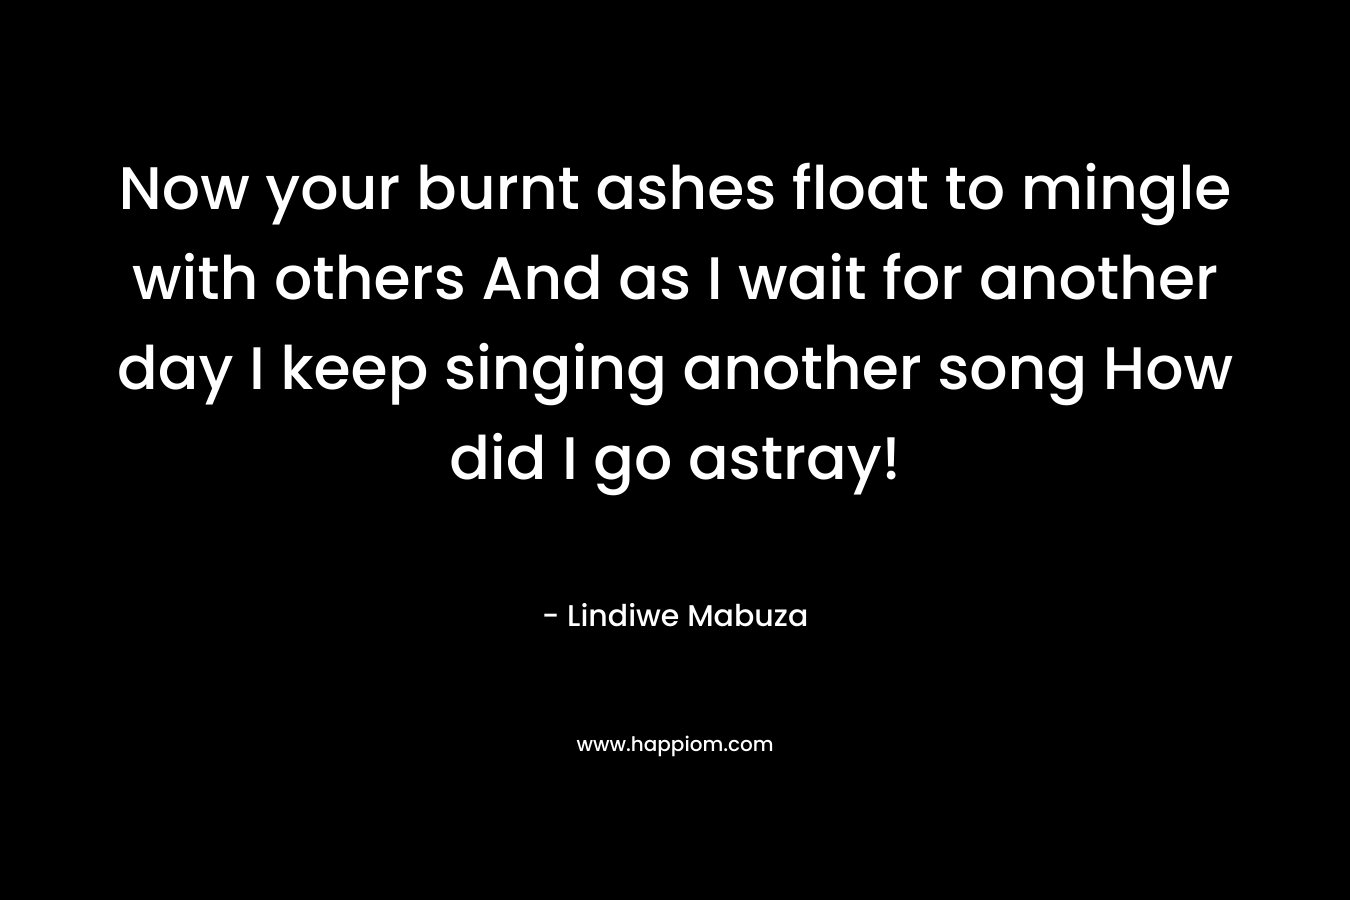 Now your burnt ashes float to mingle with others And as I wait for another day I keep singing another song How did I go astray! – Lindiwe Mabuza